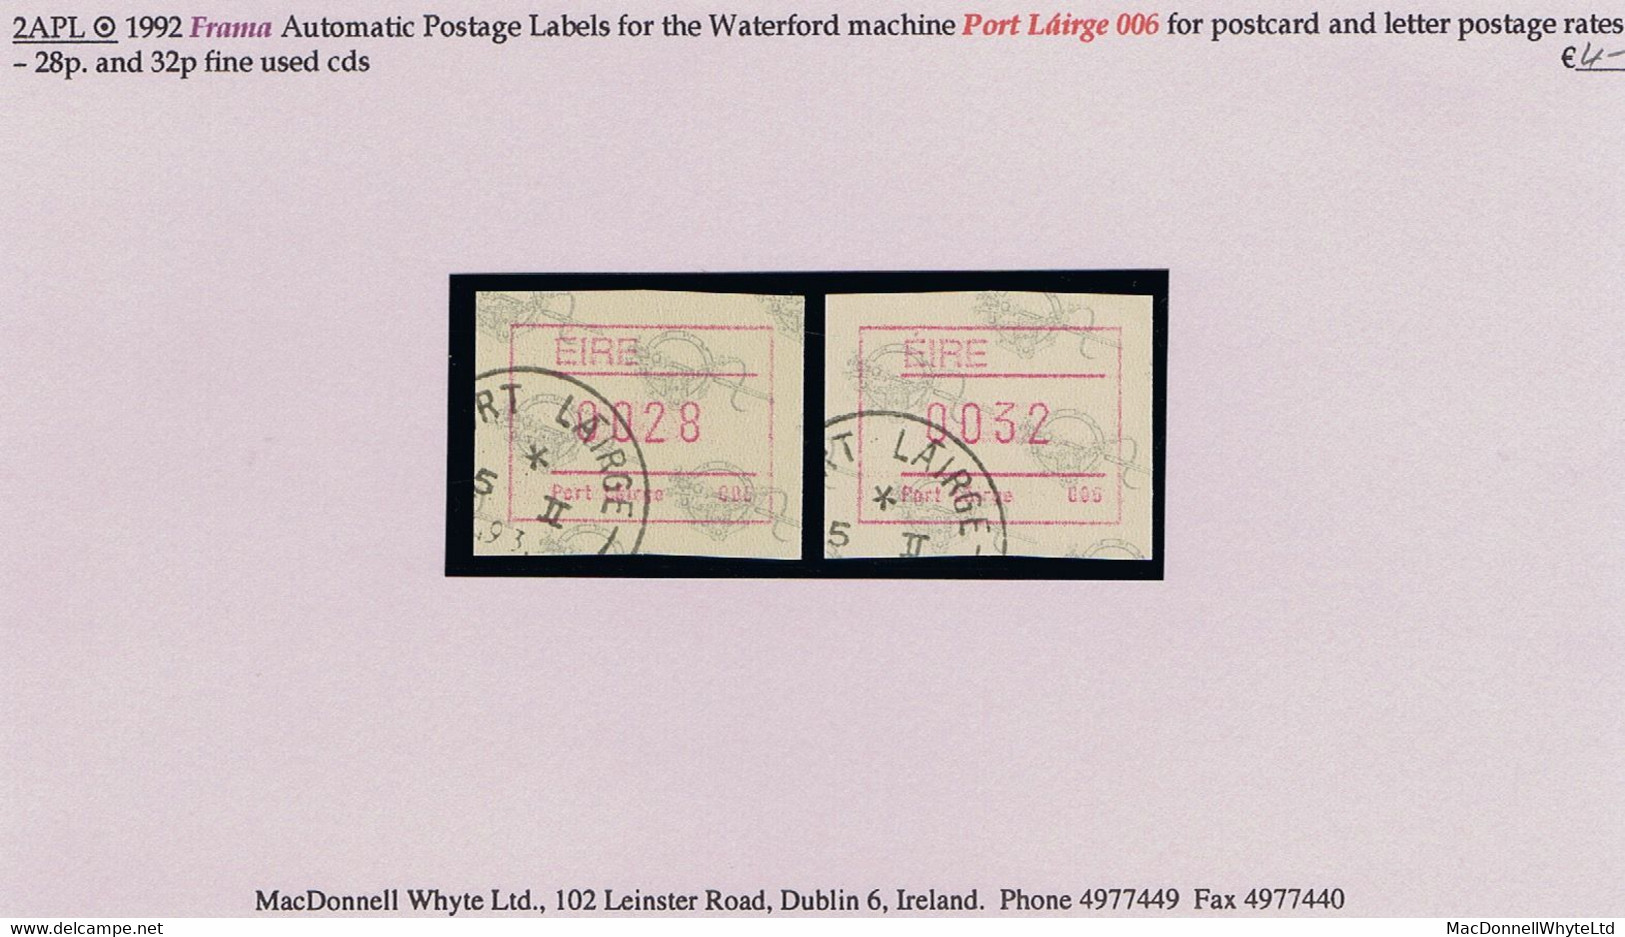 Ireland 1992 Frama Automatic Postage Labels For Waterford 006 Machine 28p Postcard Rate And 32p Letter Rate Fine Used - Franking Labels